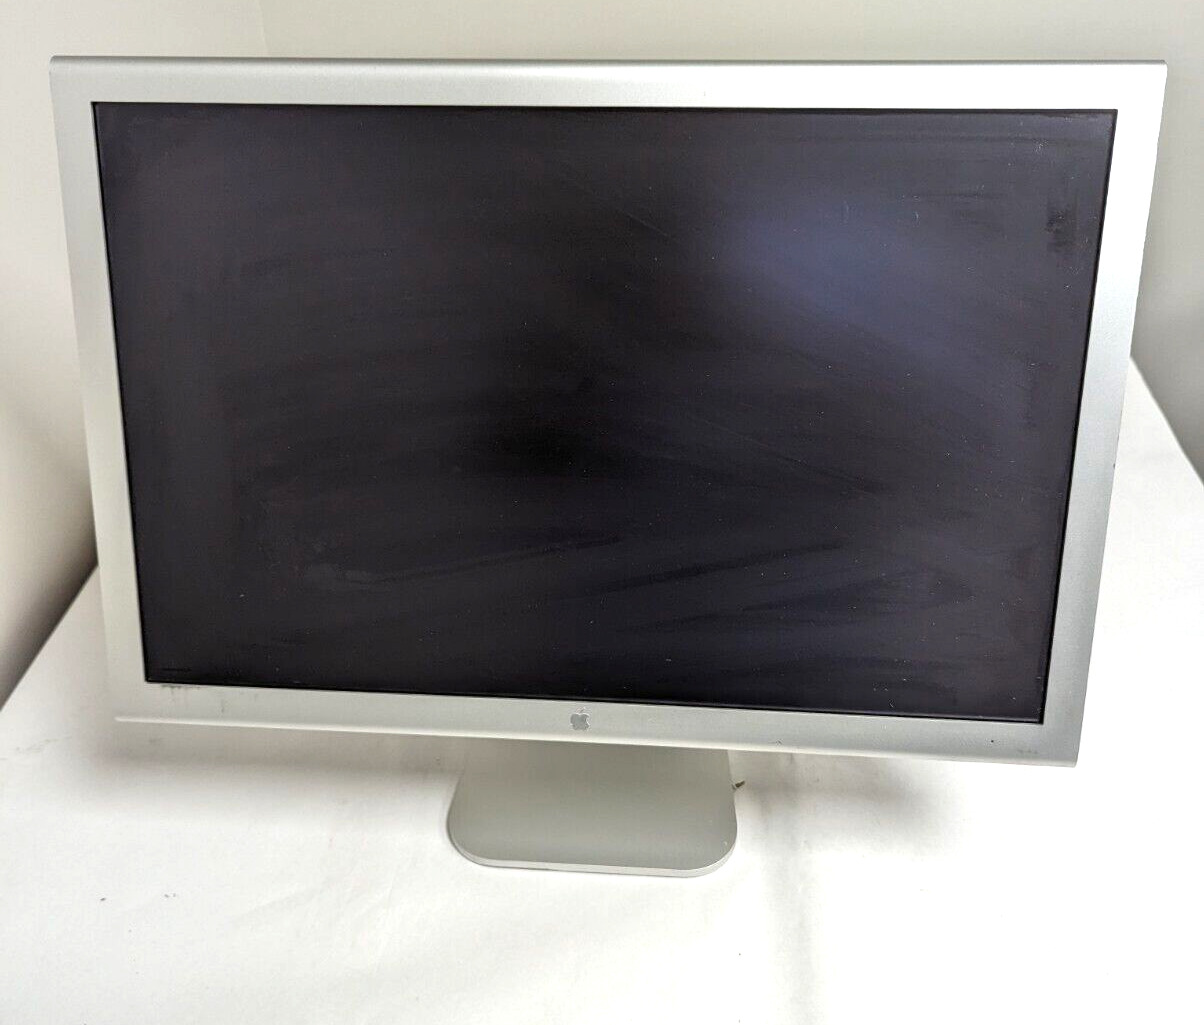 UNTESTED Apple A1081 20 inch Widescreen Cinema Display LCD Monitor no power cord